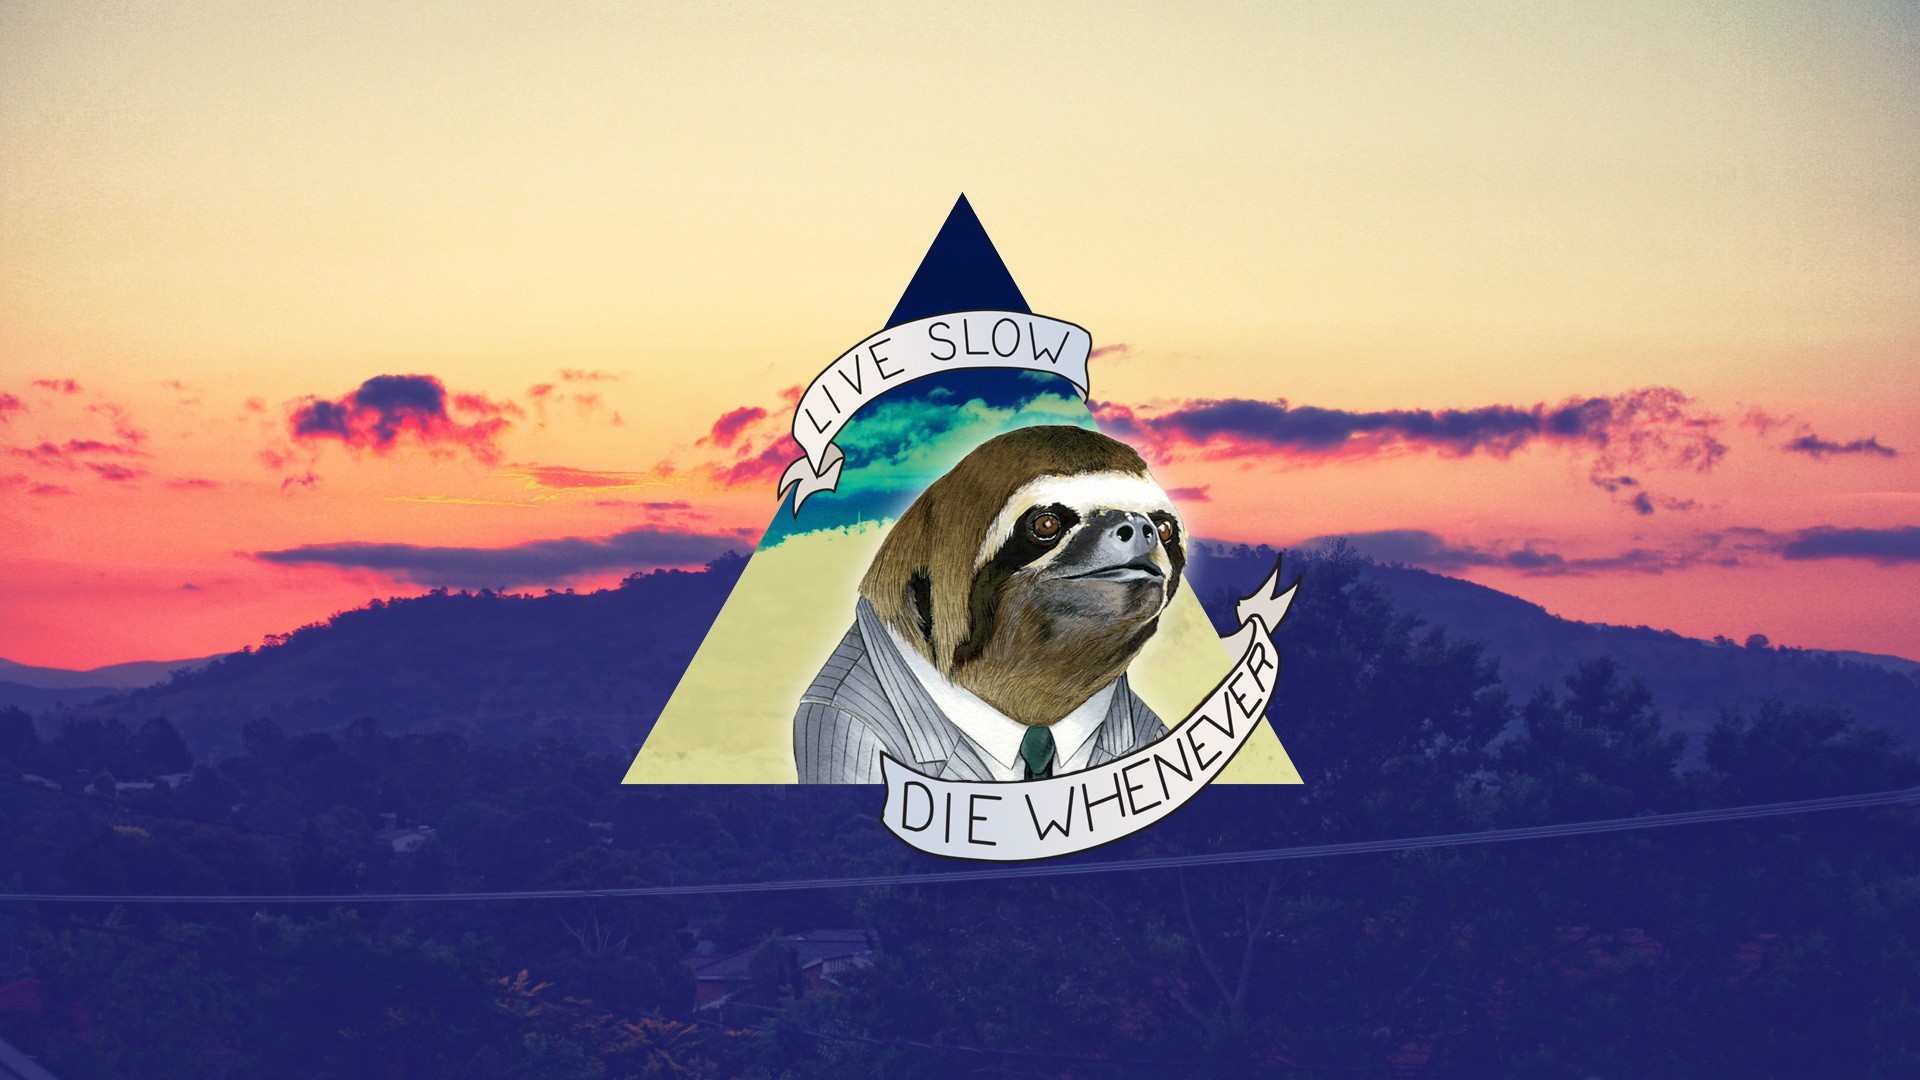 General 1920x1080 sloths triangle animals humor